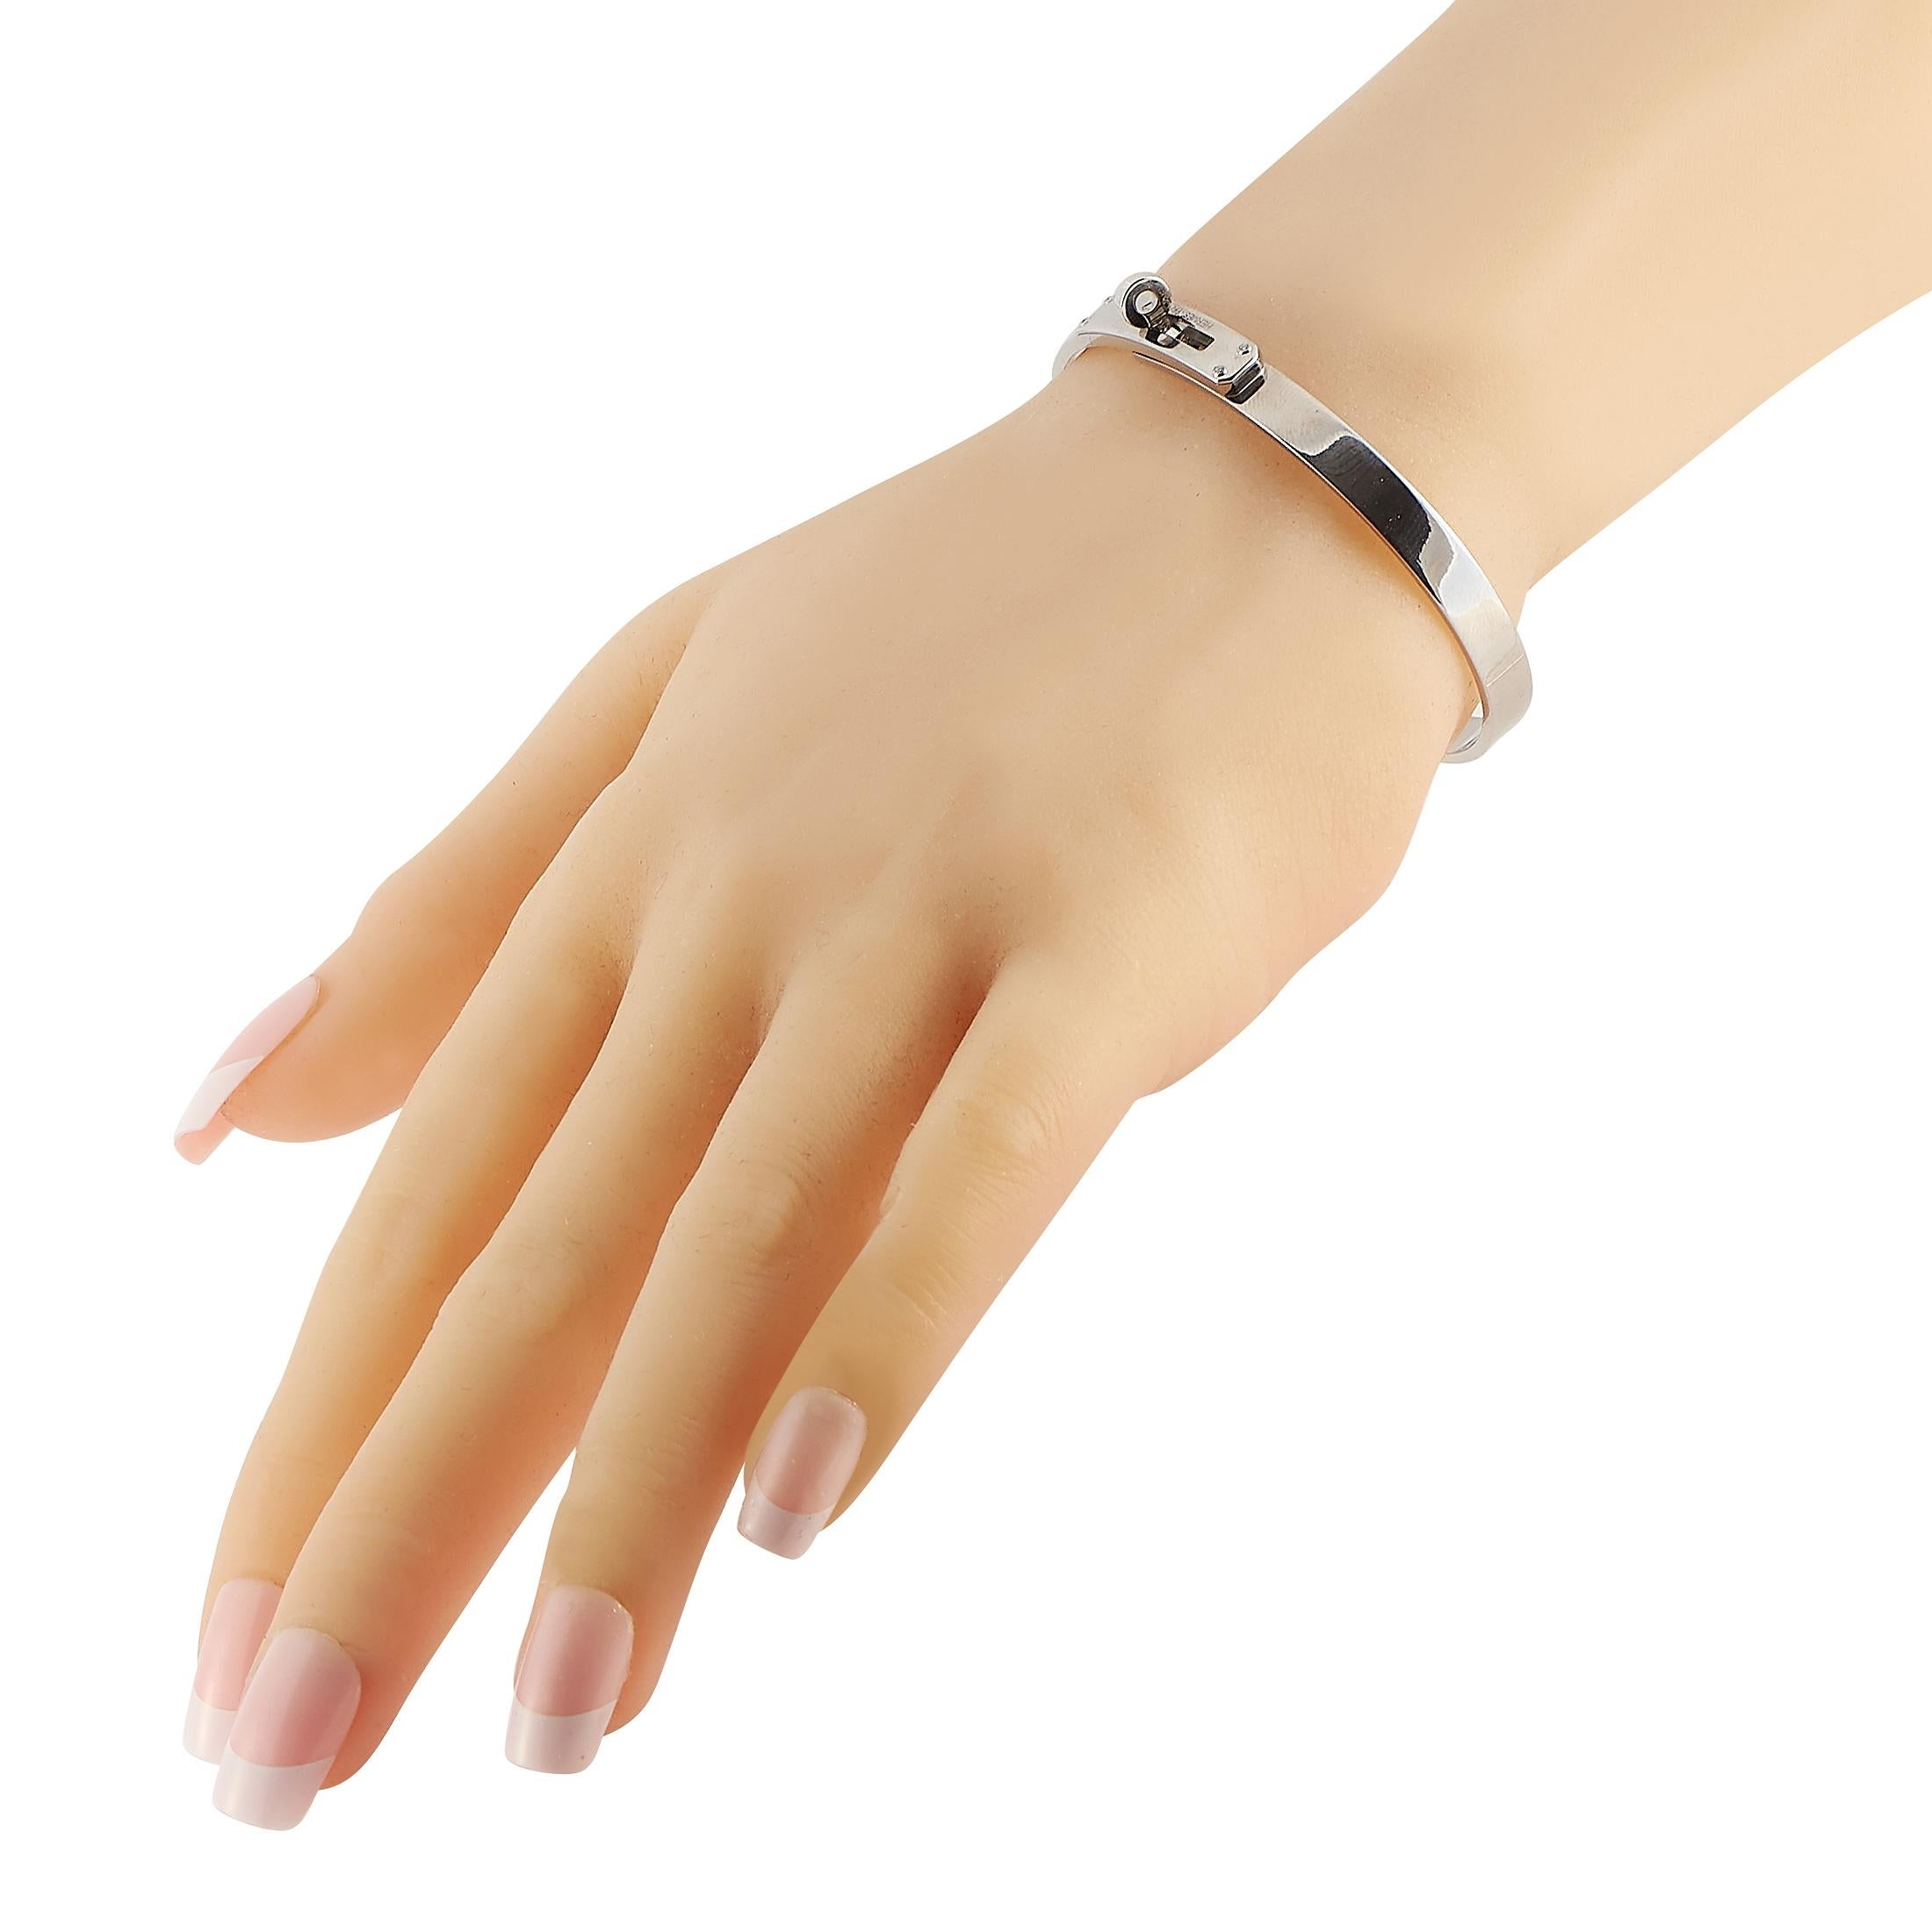 This classic bracelet from the Hermes Kelly collection is nothing short of iconic. The collection’s signature turn-lock closure elegantly accents the center of this bangle bracelet, which measures 7.5” long and is made from 18K White Gold.

 This